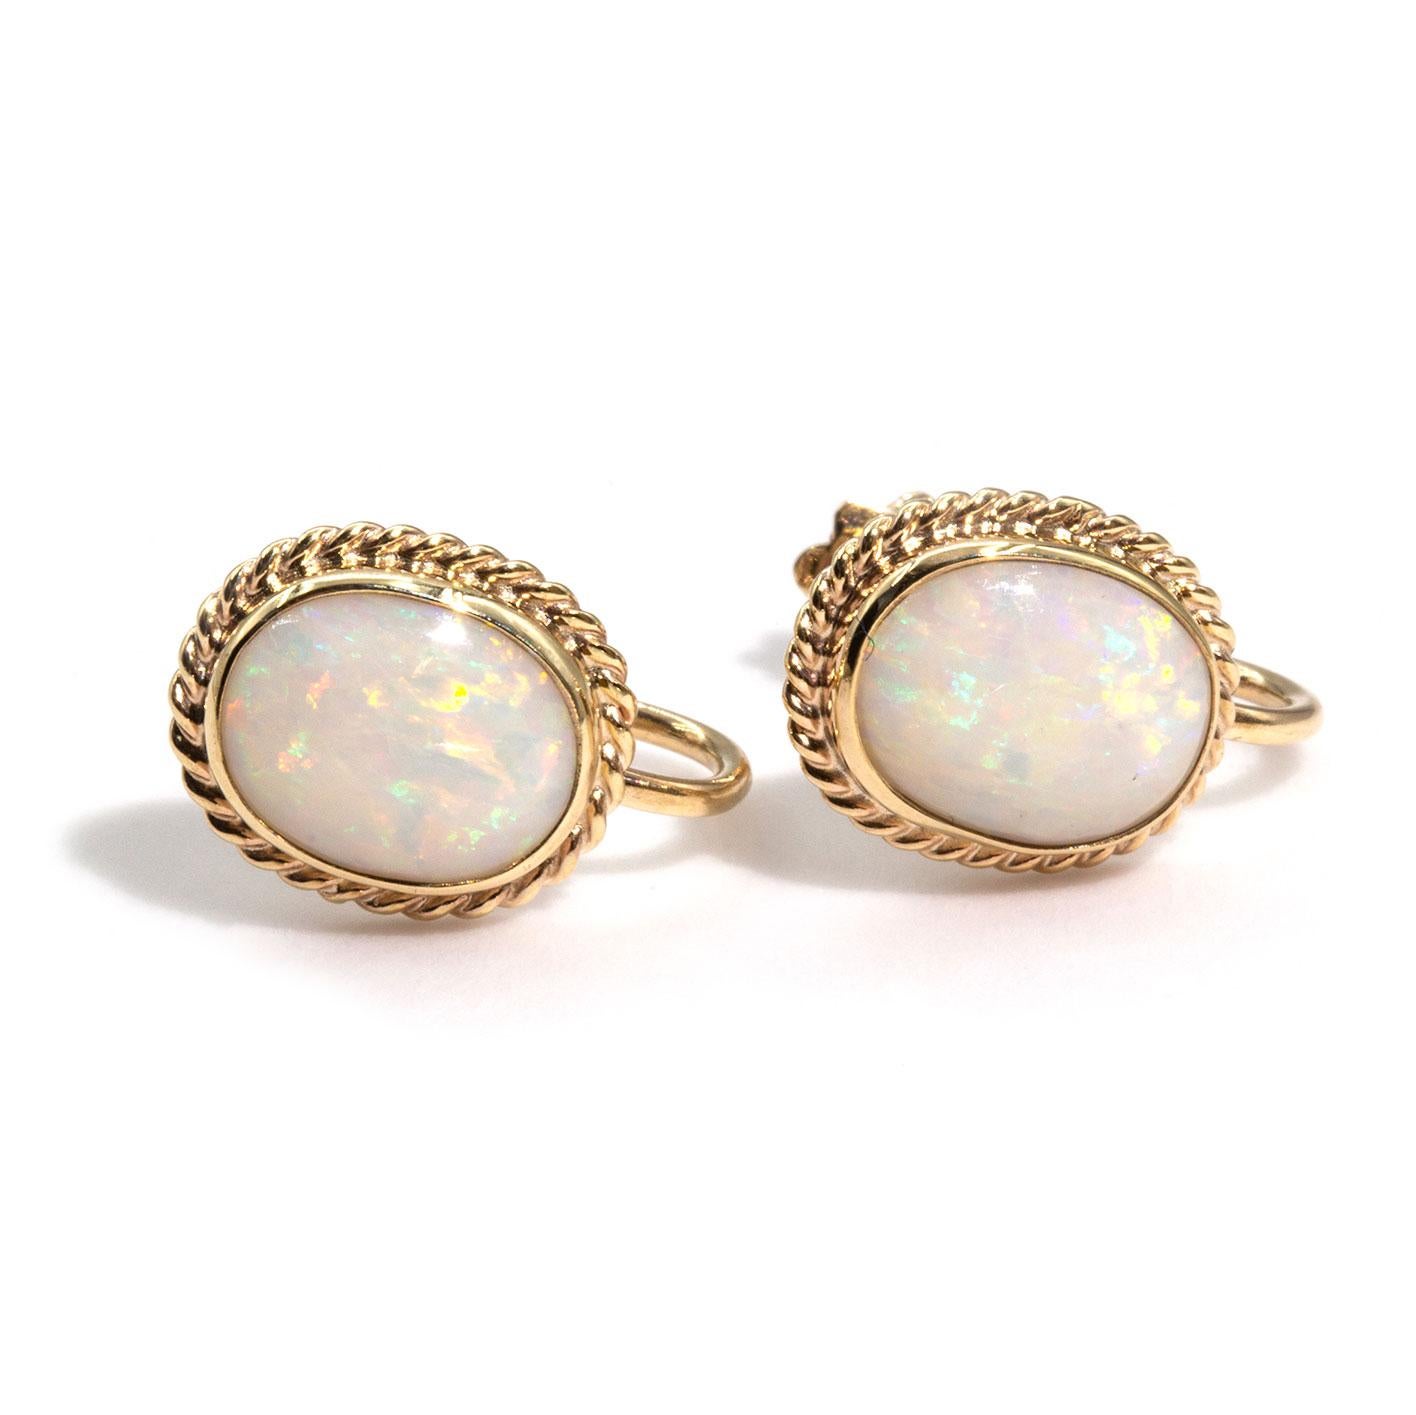 Carefully crafted in 9 carat yellow gold, are these delightful vintage pair of clip on earrings featuring oval cabochon opals displaying orange, yellow, green and blue play of colour. The opals  measure approximately 9x7 millimetres and are